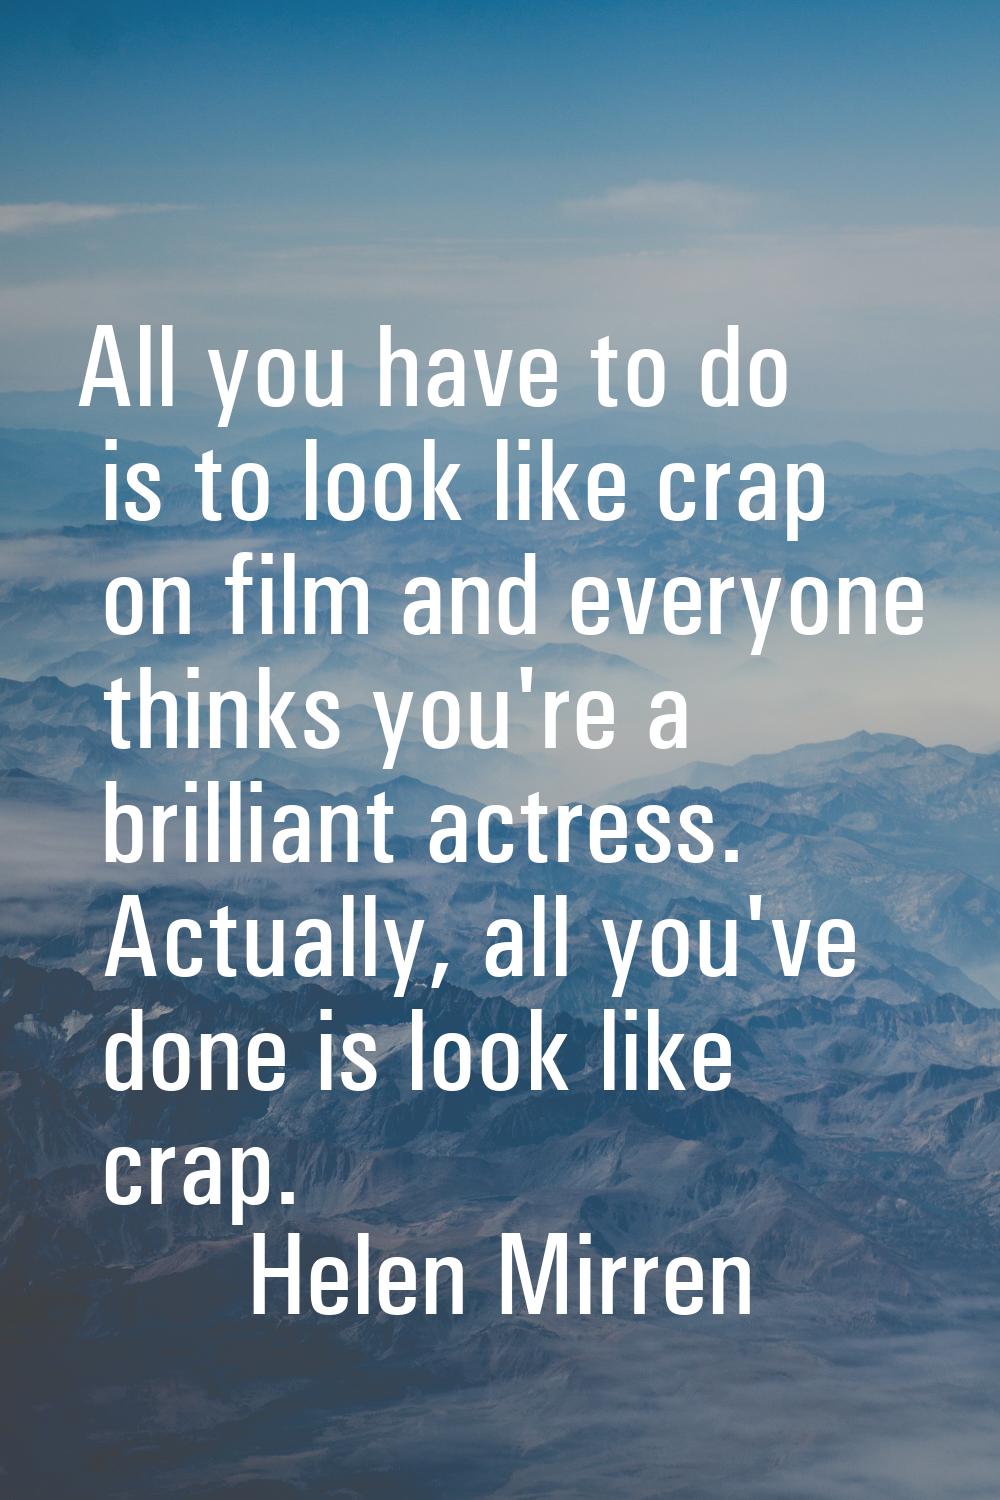 All you have to do is to look like crap on film and everyone thinks you're a brilliant actress. Act